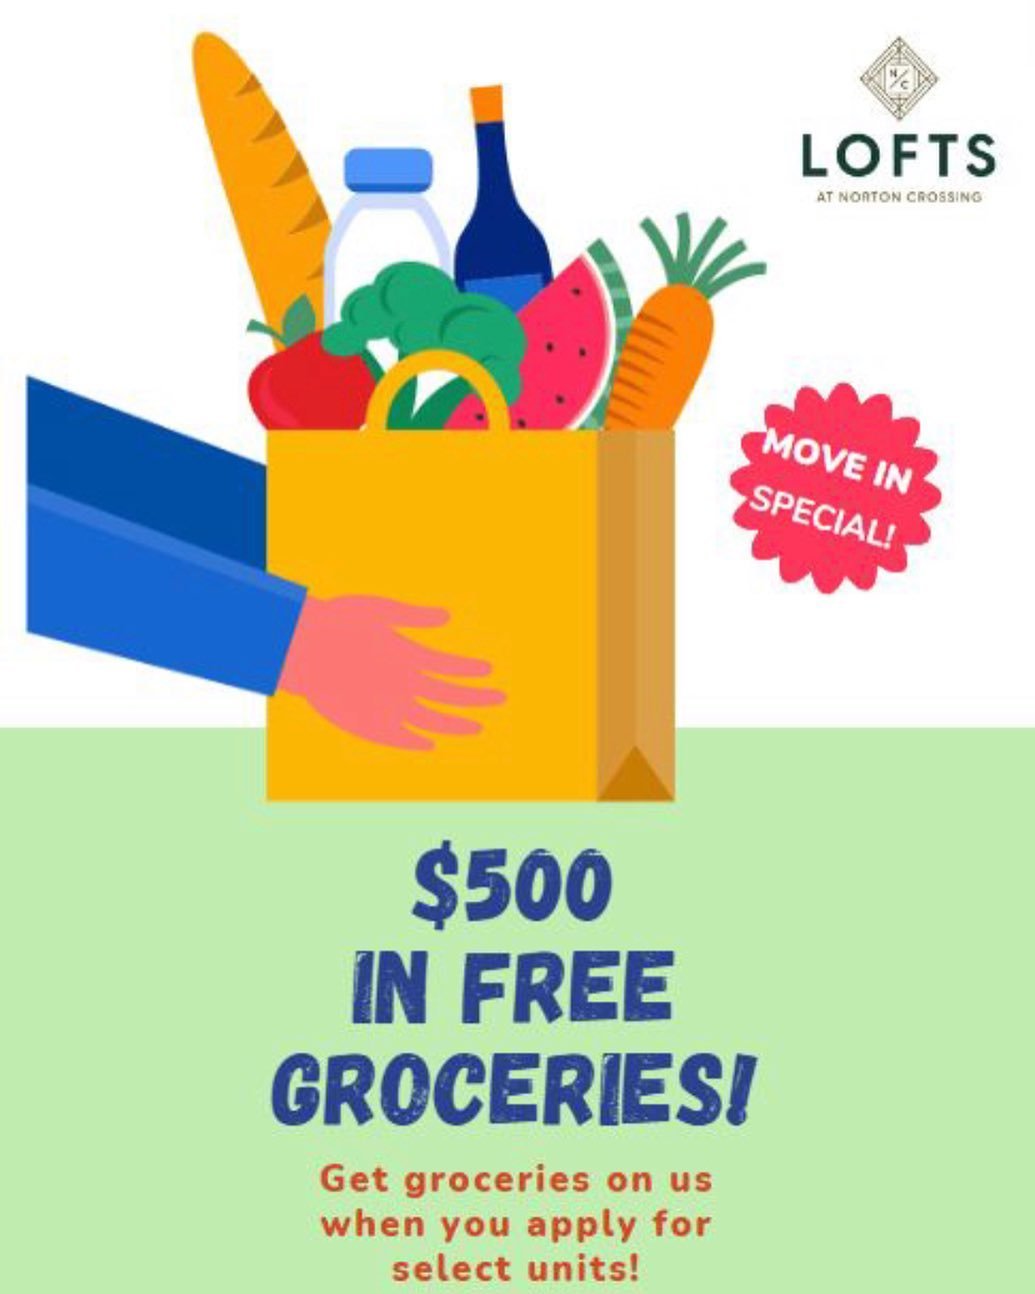 We have extended and updated our Look &amp; Lease Special. 

Look &amp; Lease Special- Groceries On Us!
Tour, apply, and move in to select apartments by May 18th and receive $500 in groceries on us!